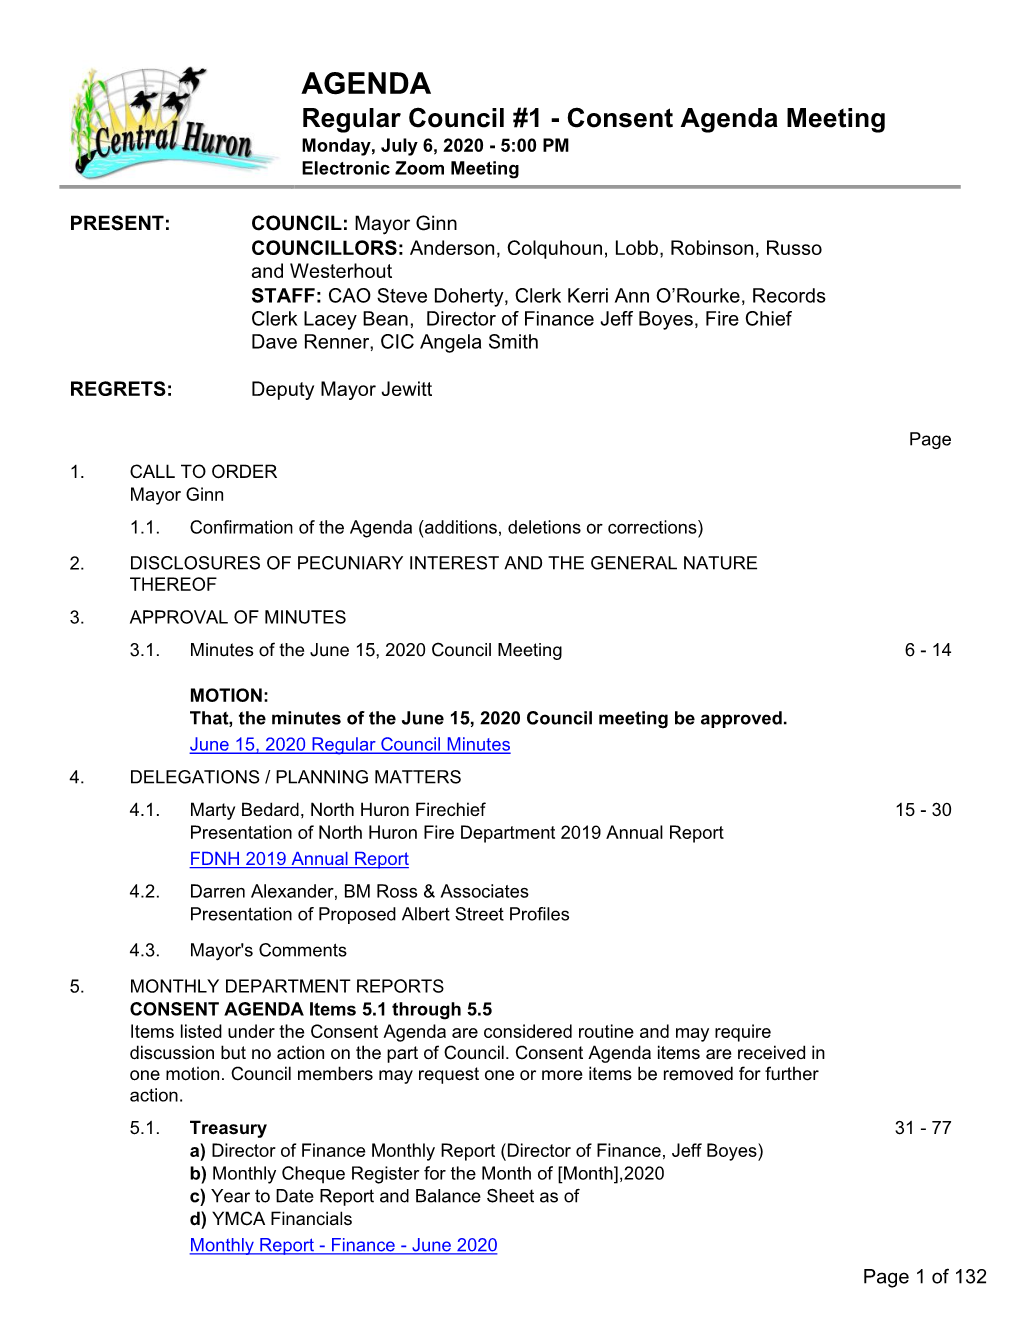 Regular Council #1 - Consent Agenda Meeting Monday, July 6, 2020 - 5:00 PM Electronic Zoom Meeting